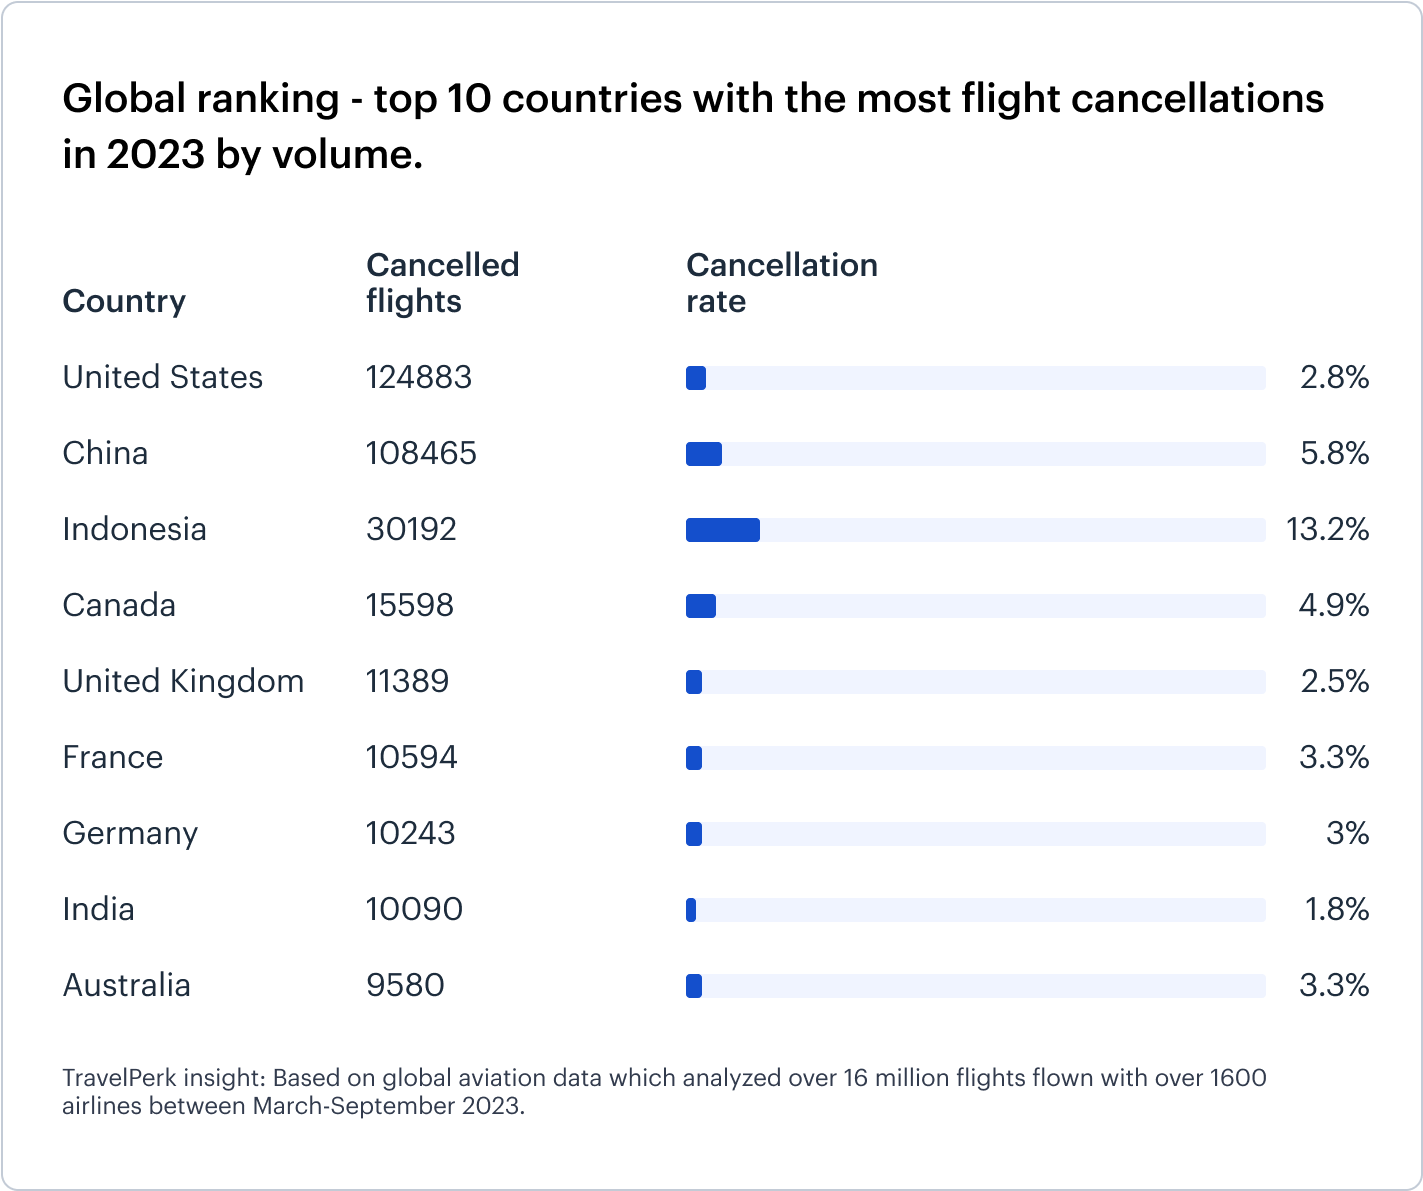 Global-ranking-top-10 countries-with-flight-cancellations-in-2023 (1)